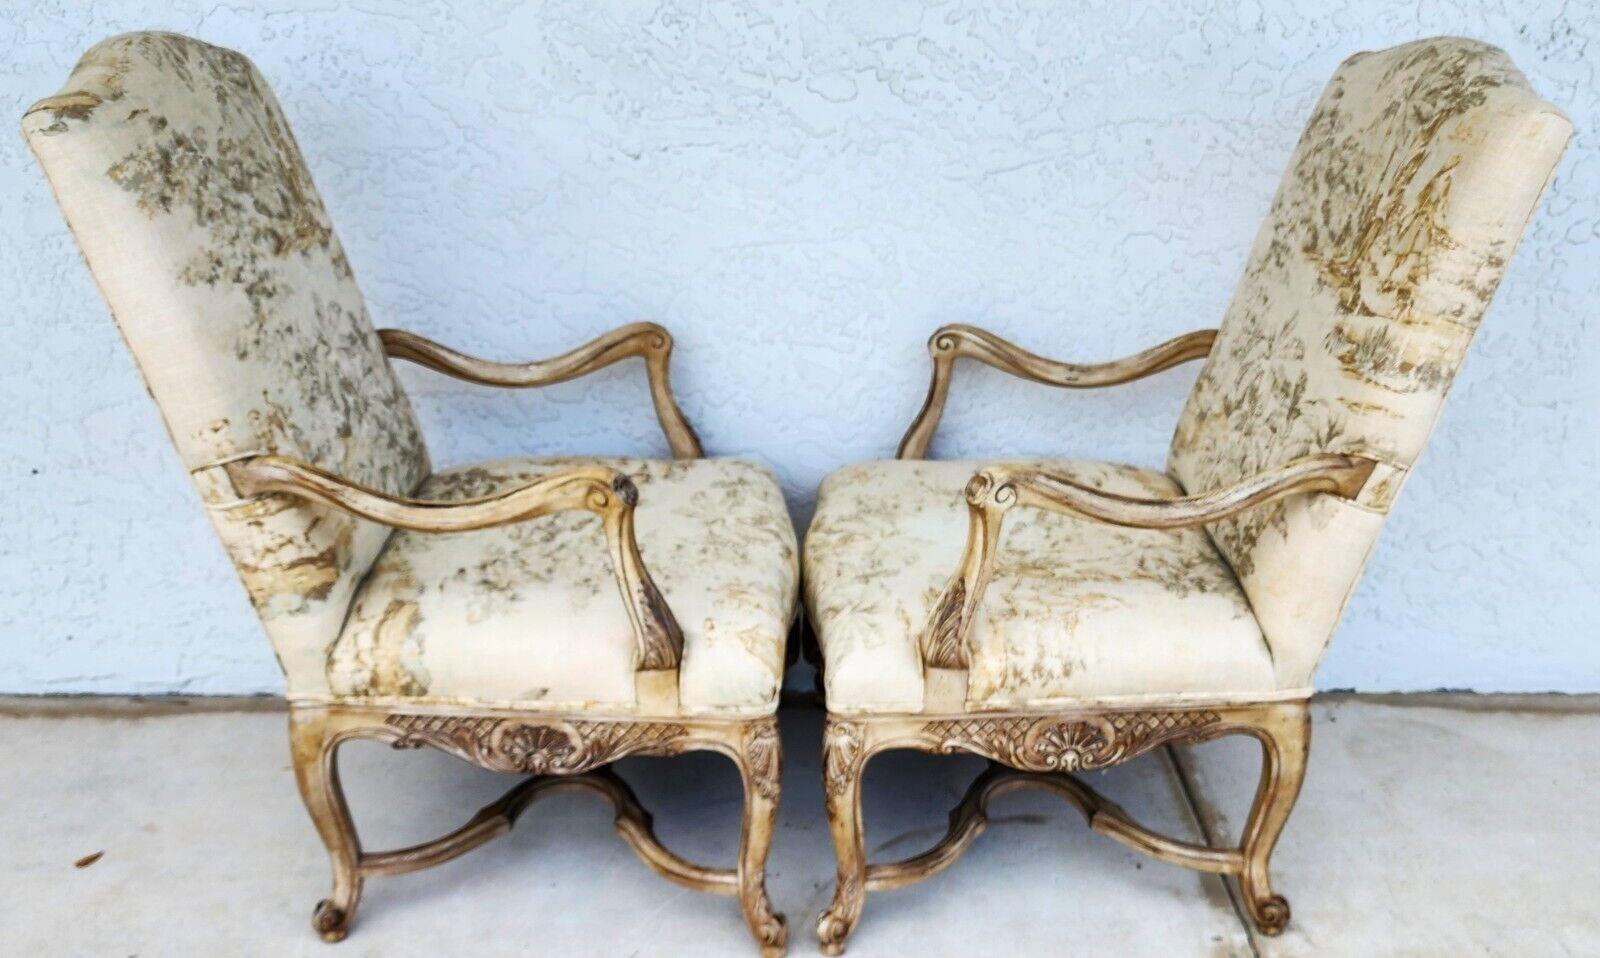 For FULL item description click on CONTINUE READING at the bottom of this page.

Offering One Of Our Recent Palm Beach Estate Fine Furniture Acquisitions Of A
Pair of Italian Linen Armchairs by Woodmark

Approximate Measurements in Inches
43